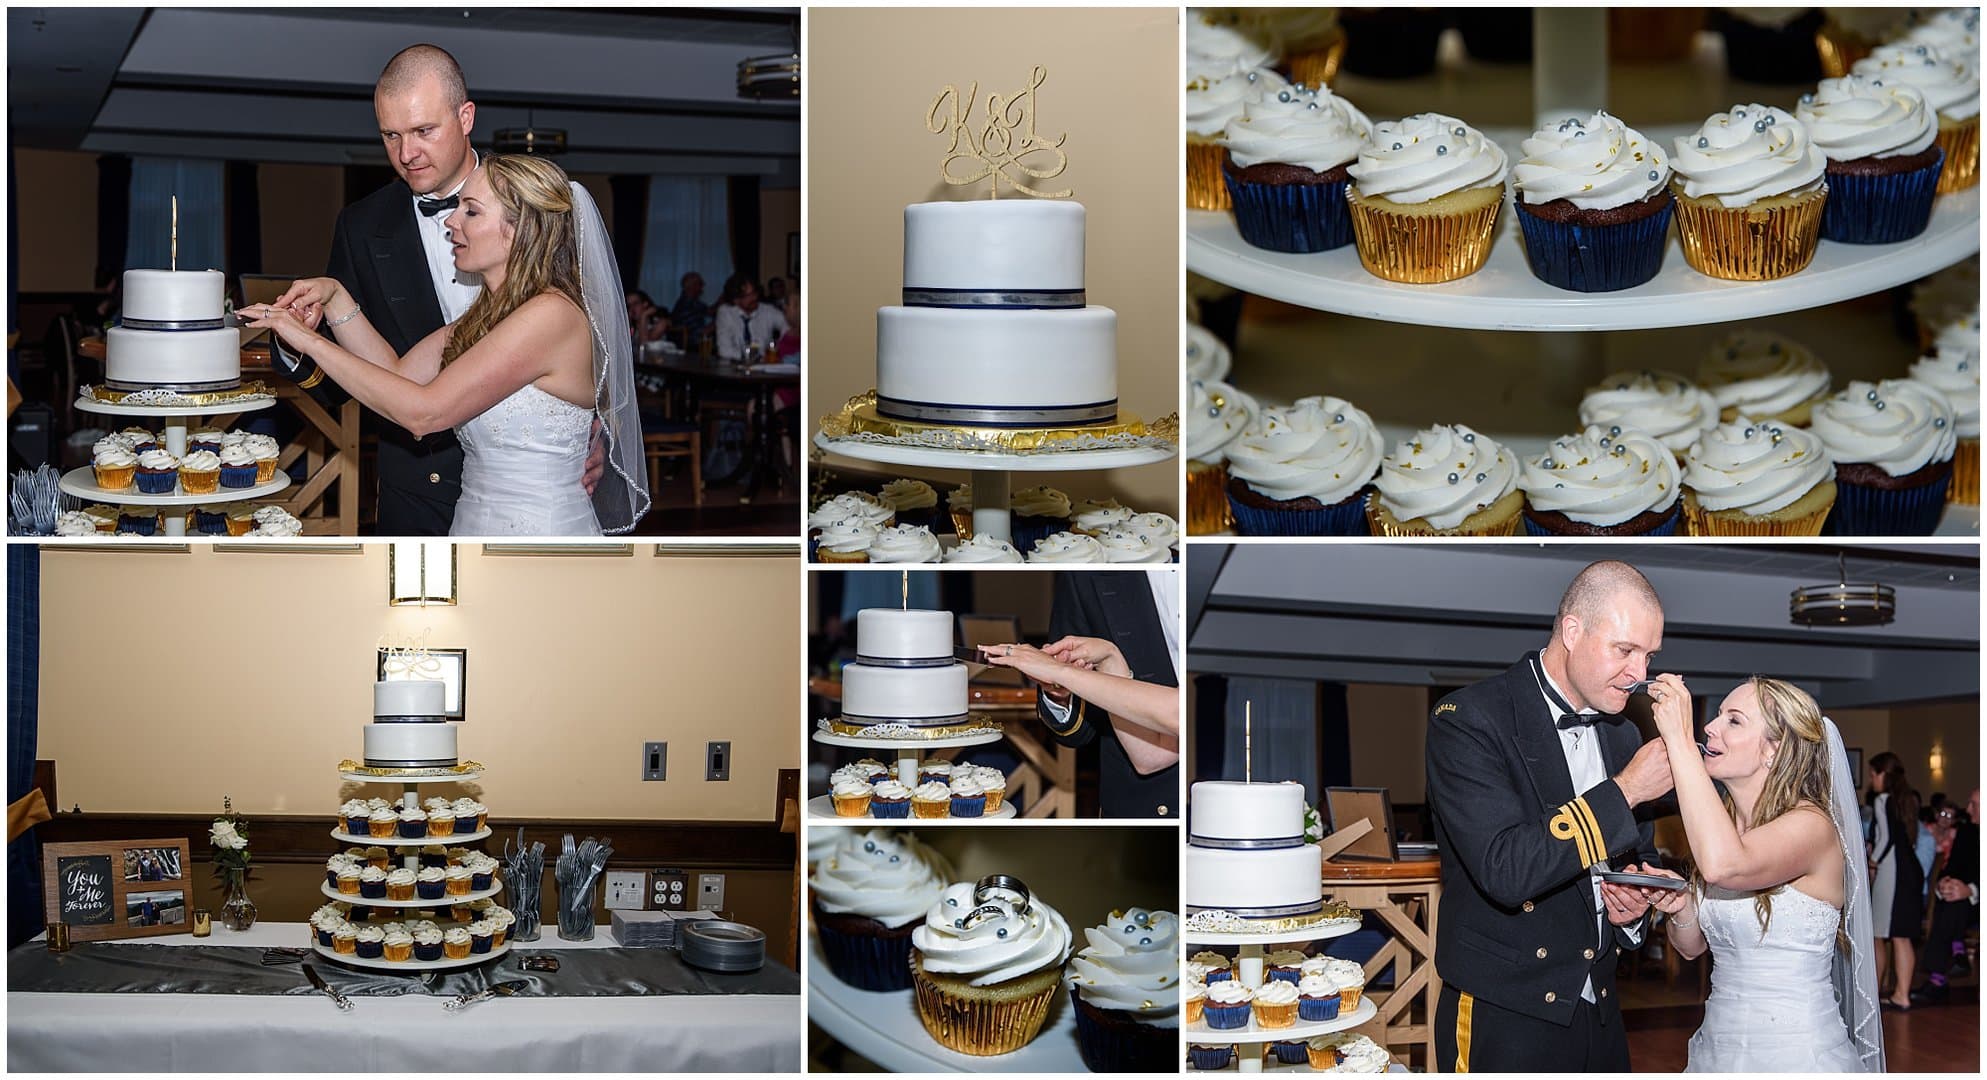 The bride and groom cut the wedding cake and feed each other during their wedding at Juno Tower in Halifax.